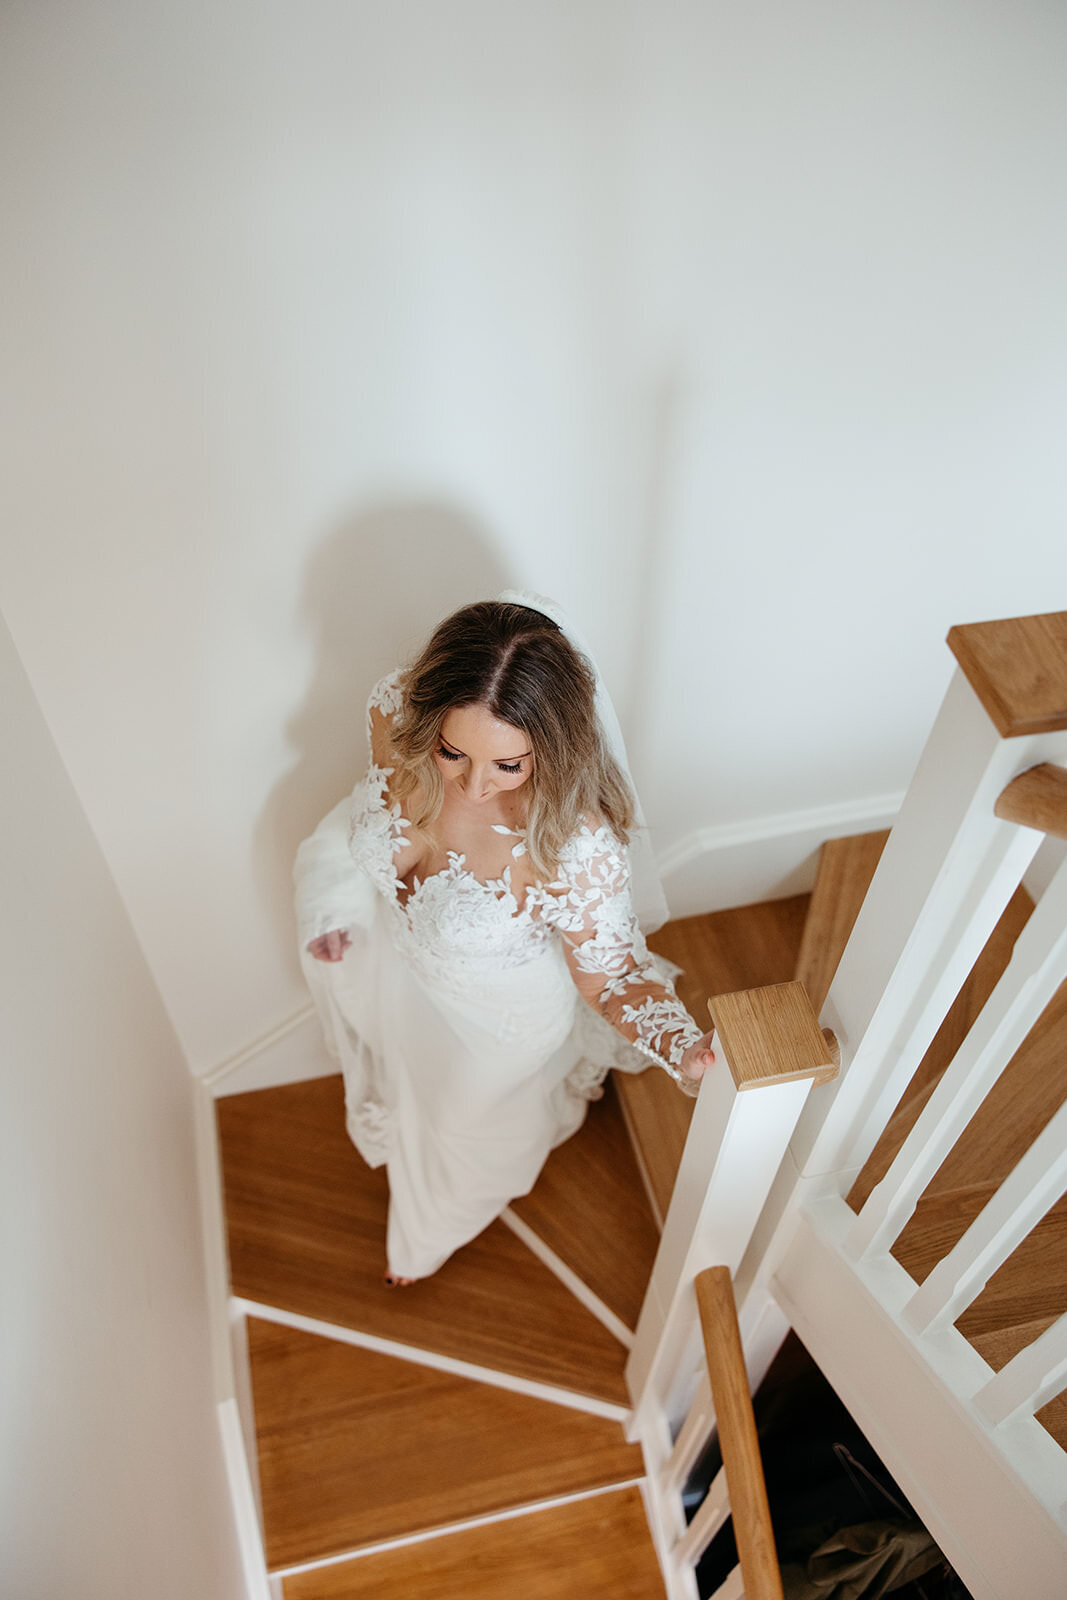 A bride ascending a wooden staircase, dressed in a white gown with lace sleeves